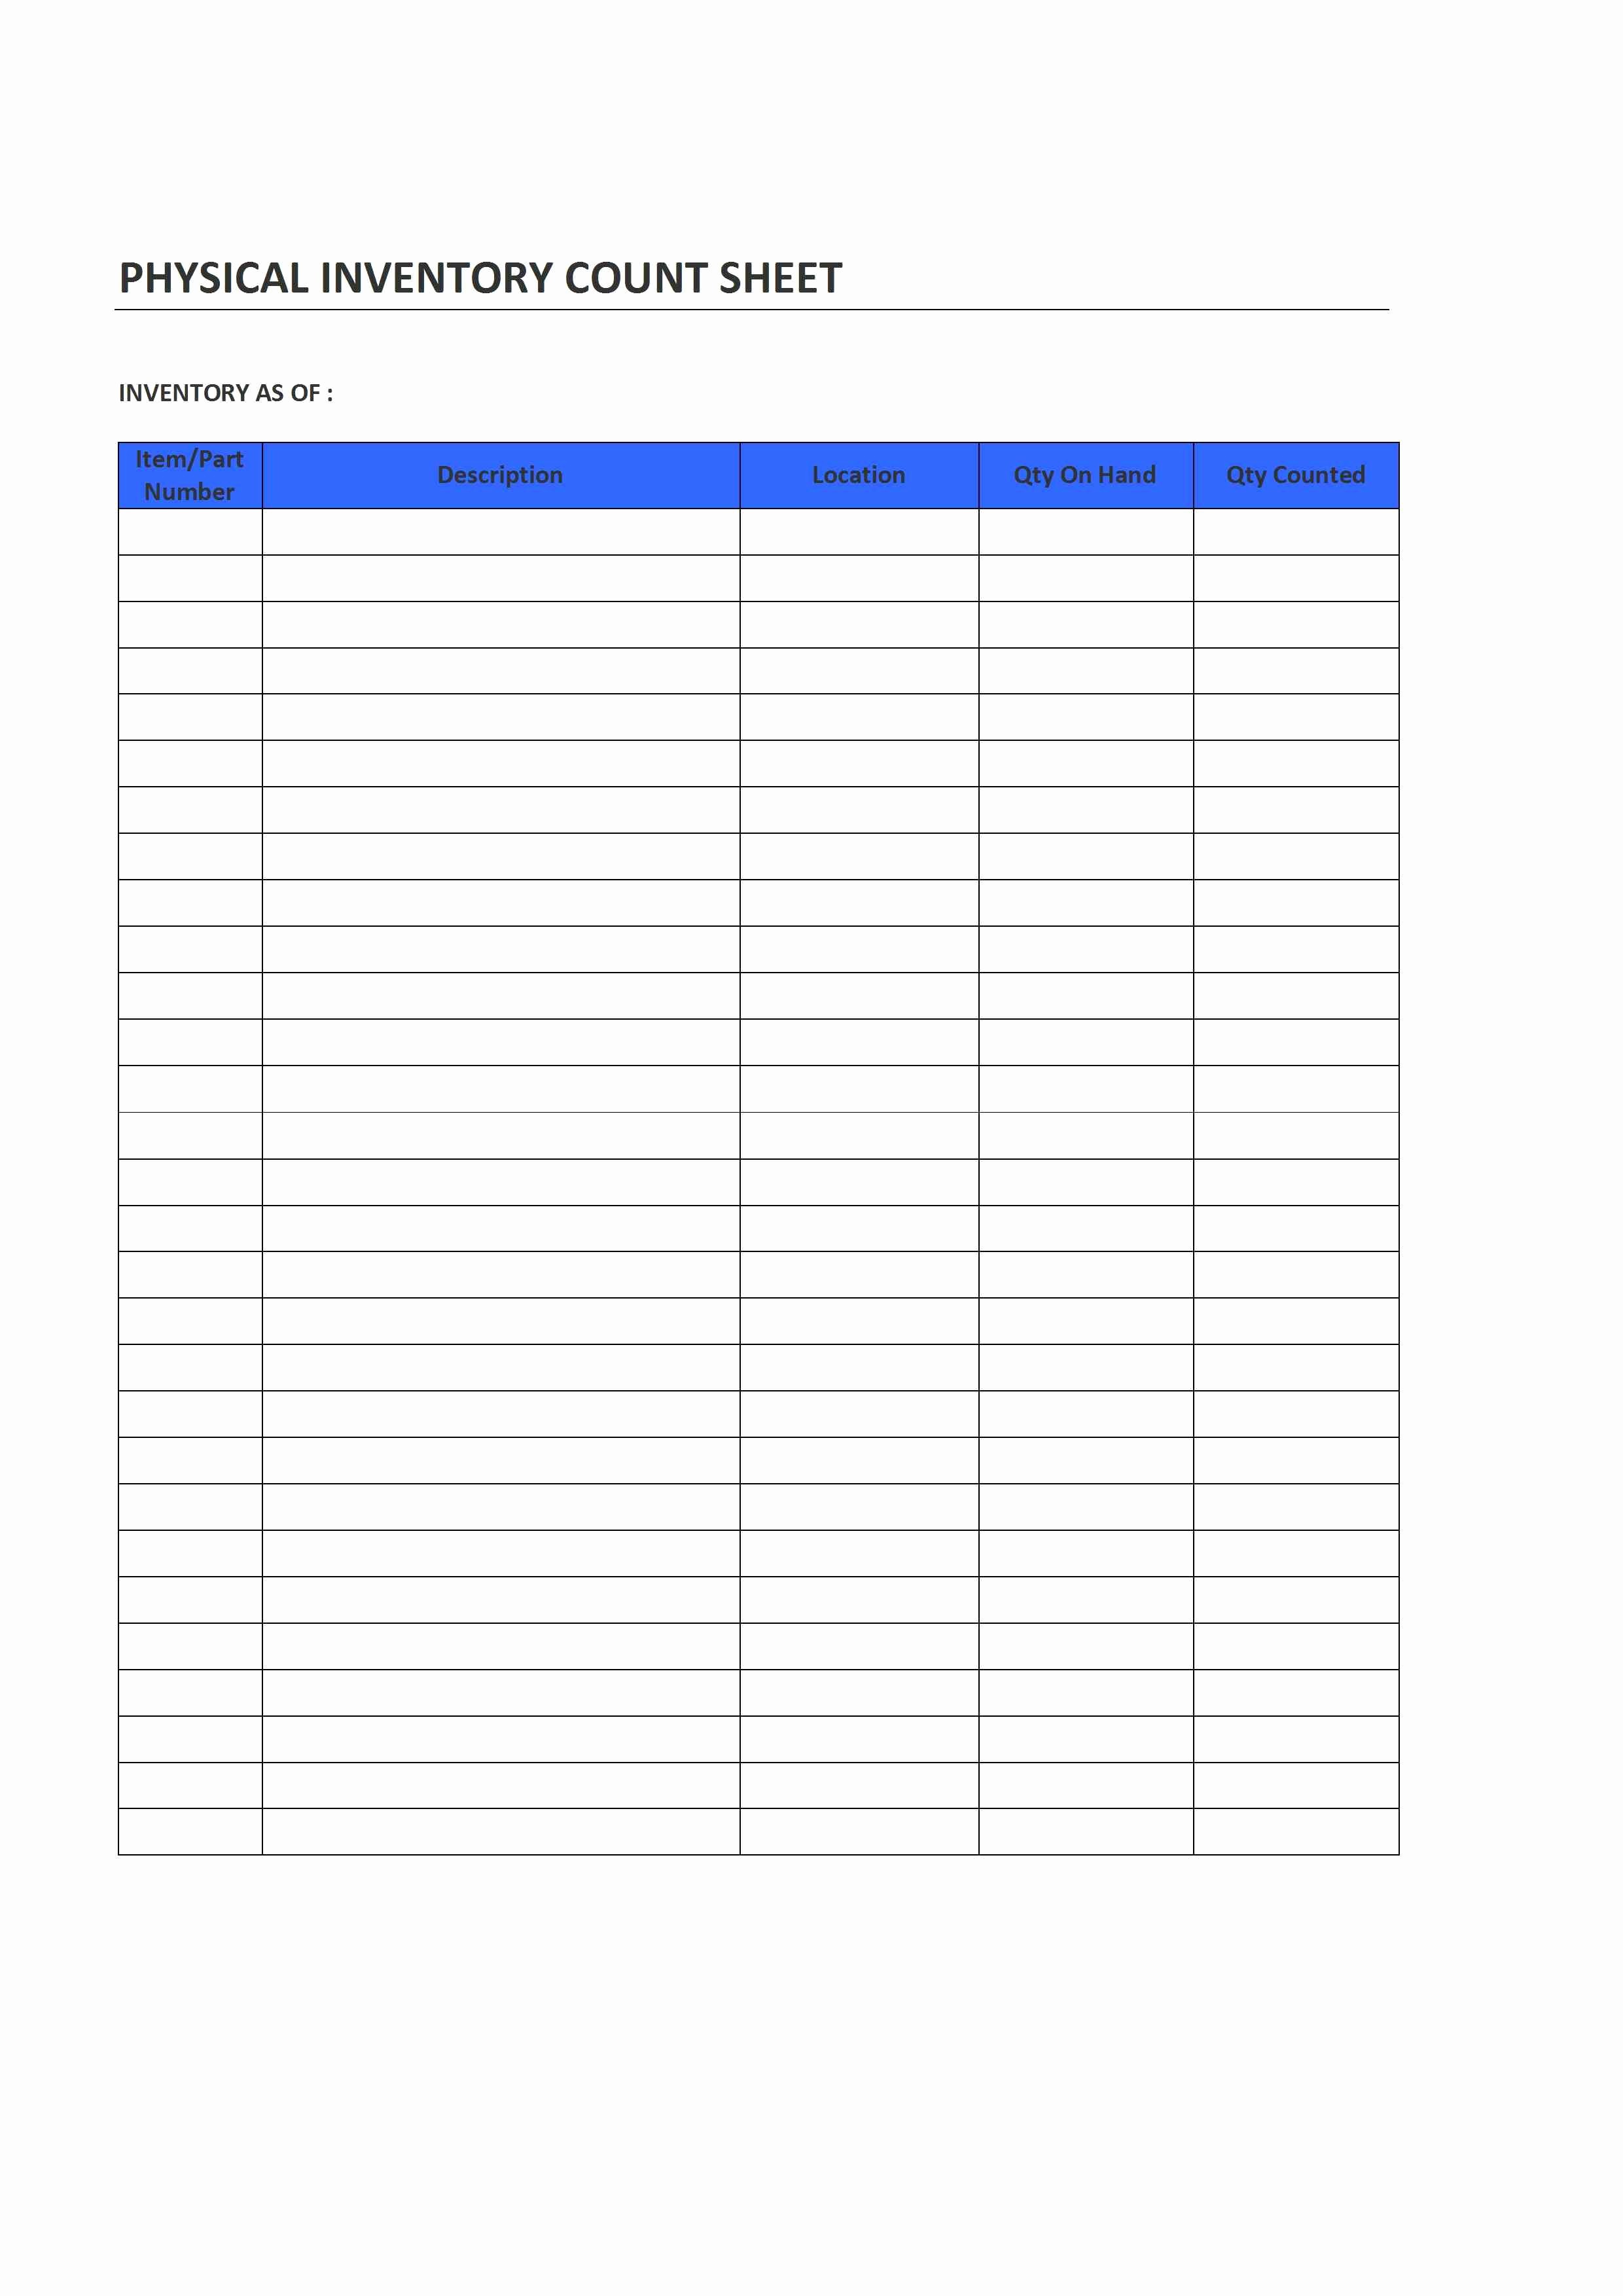 Inventory Count Sheet Template Free Luxury Physical Inventory Count Sheet